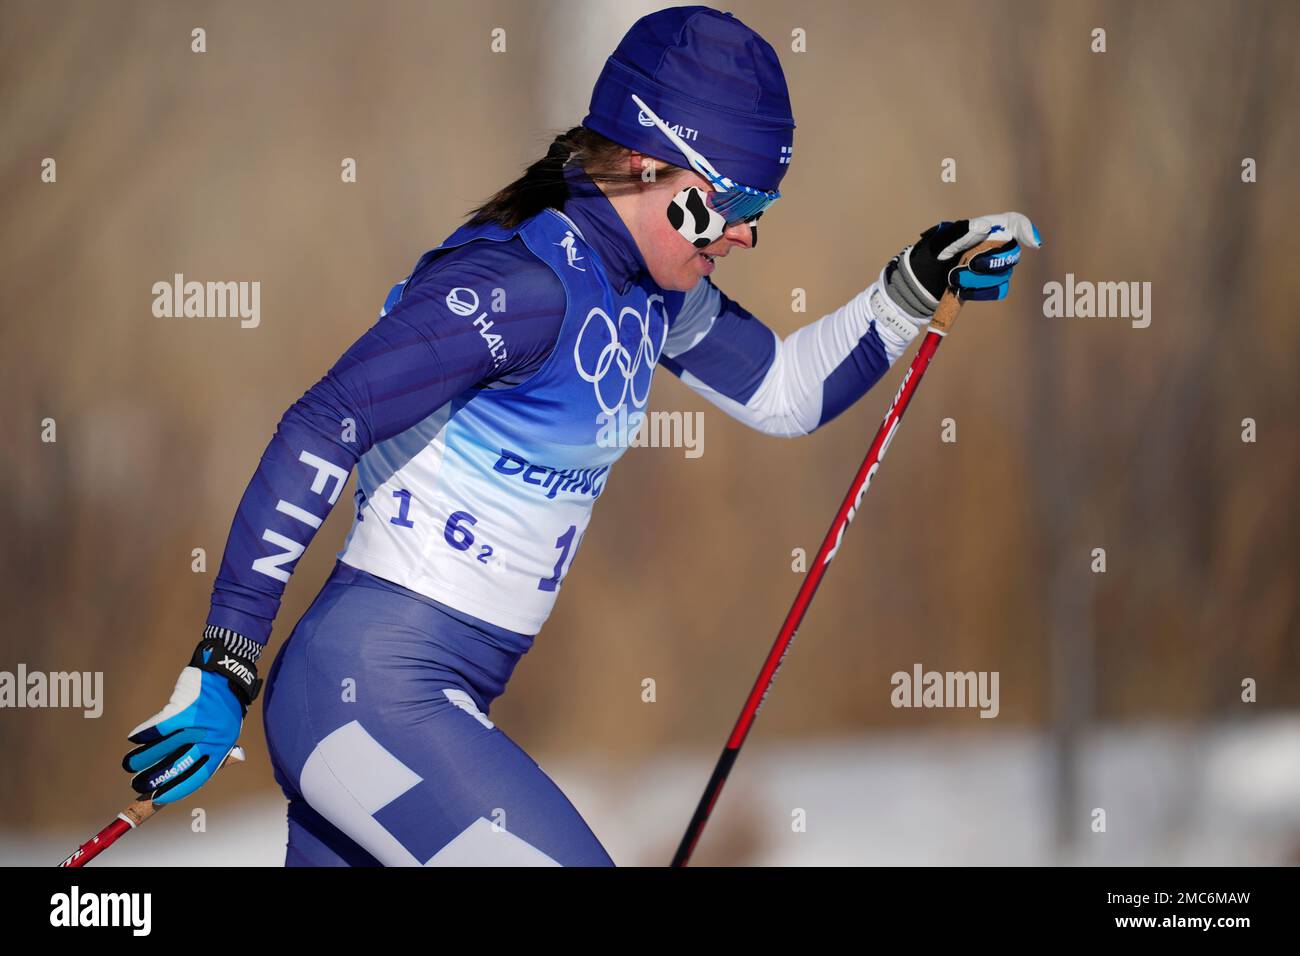 Krista Parmakoski, of Finland, competes during the womens team sprint classic cross-country skiing competition at the 2022 Winter Olympics, Wednesday, Feb